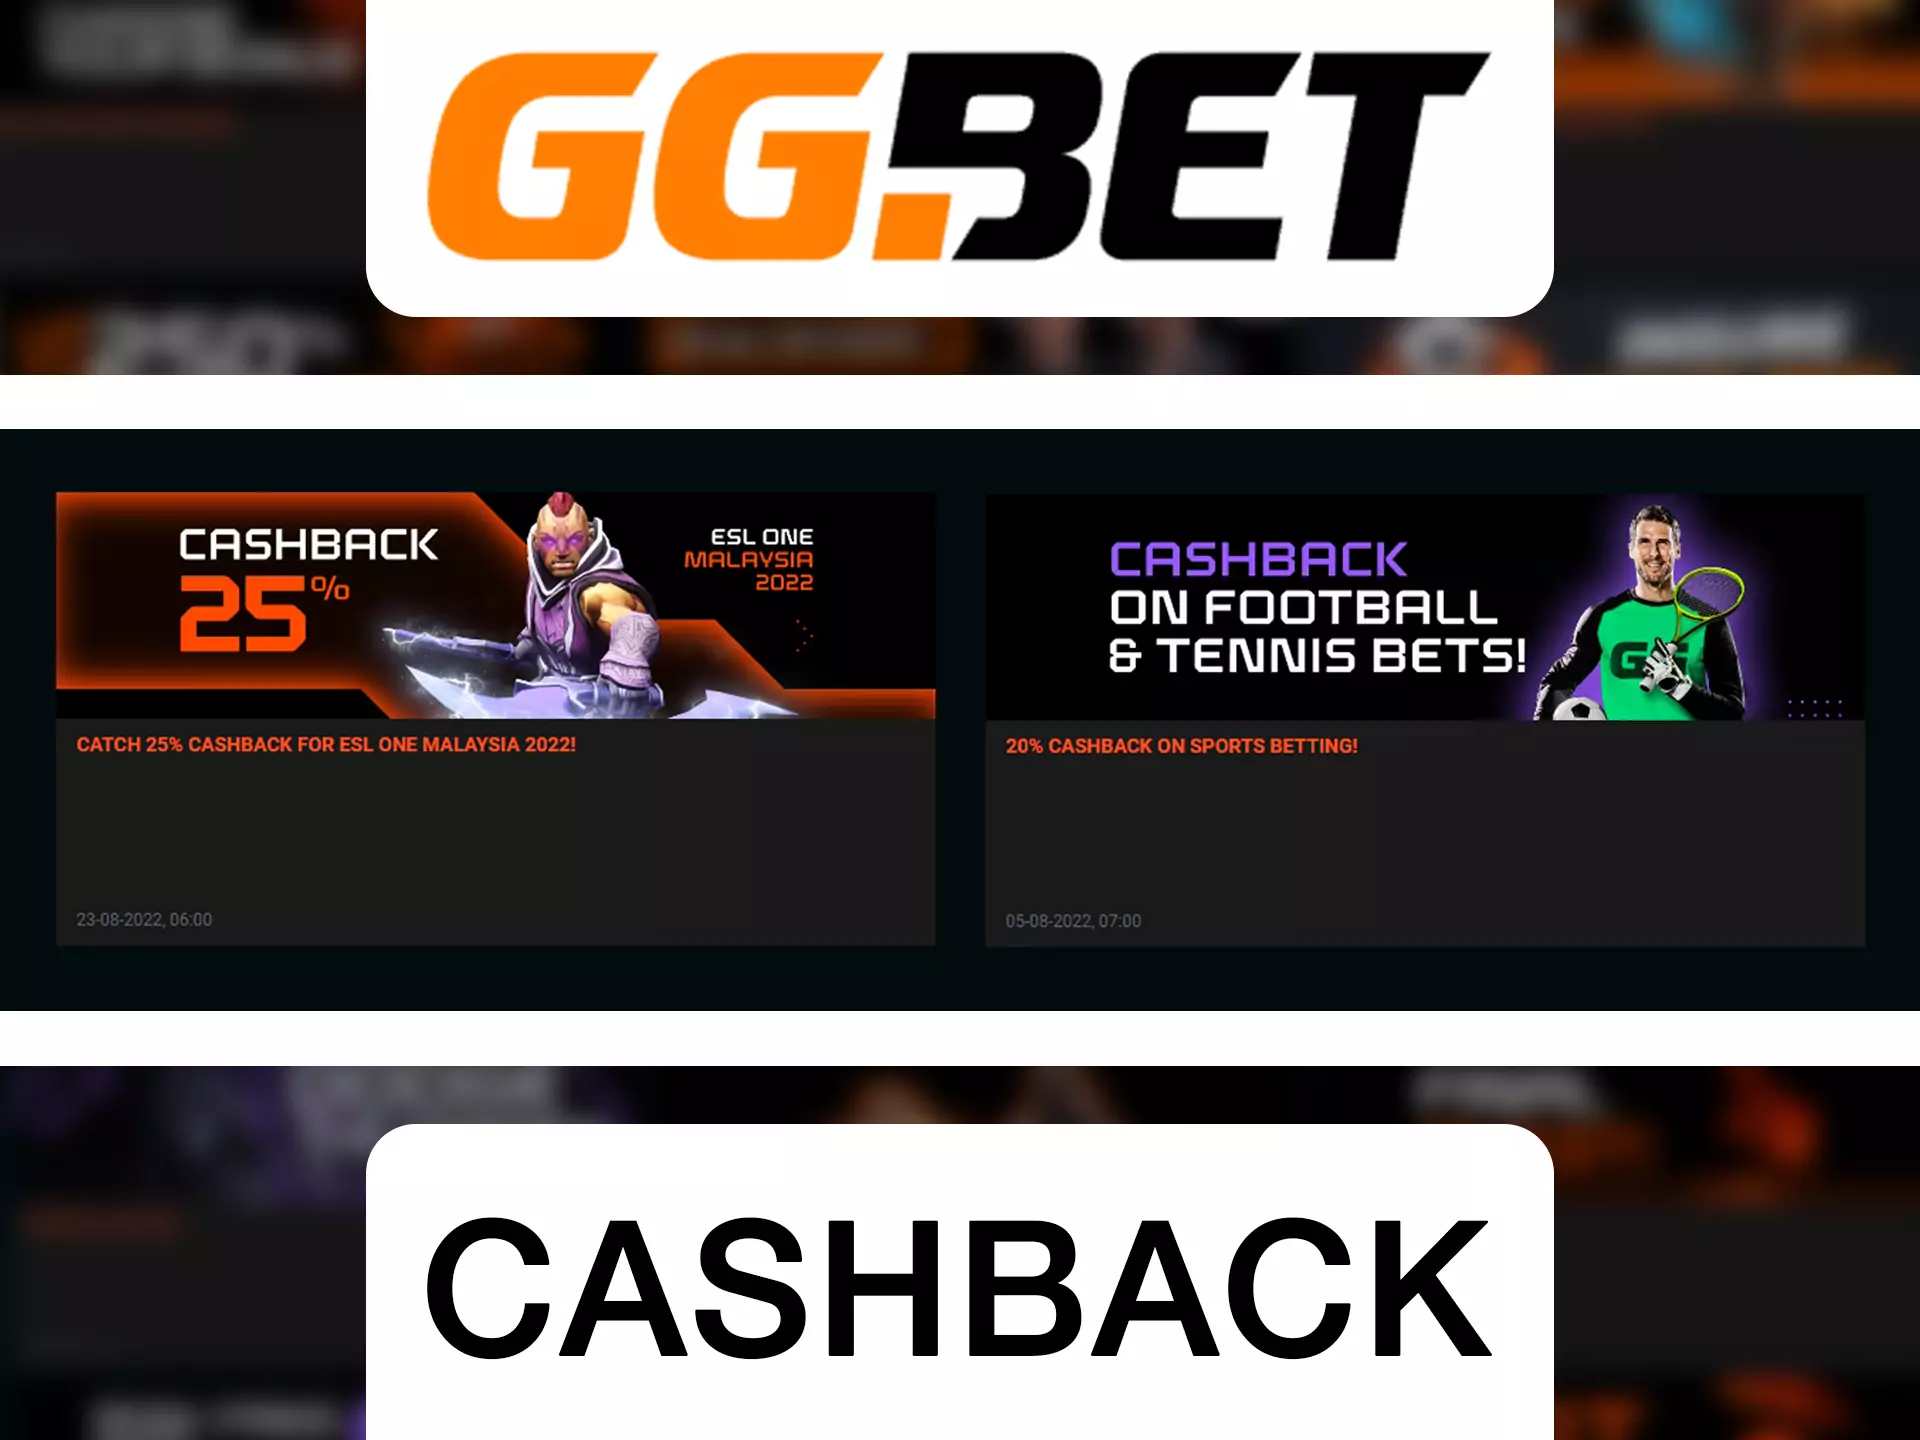 Get your money back with GGBet cashback promotions.